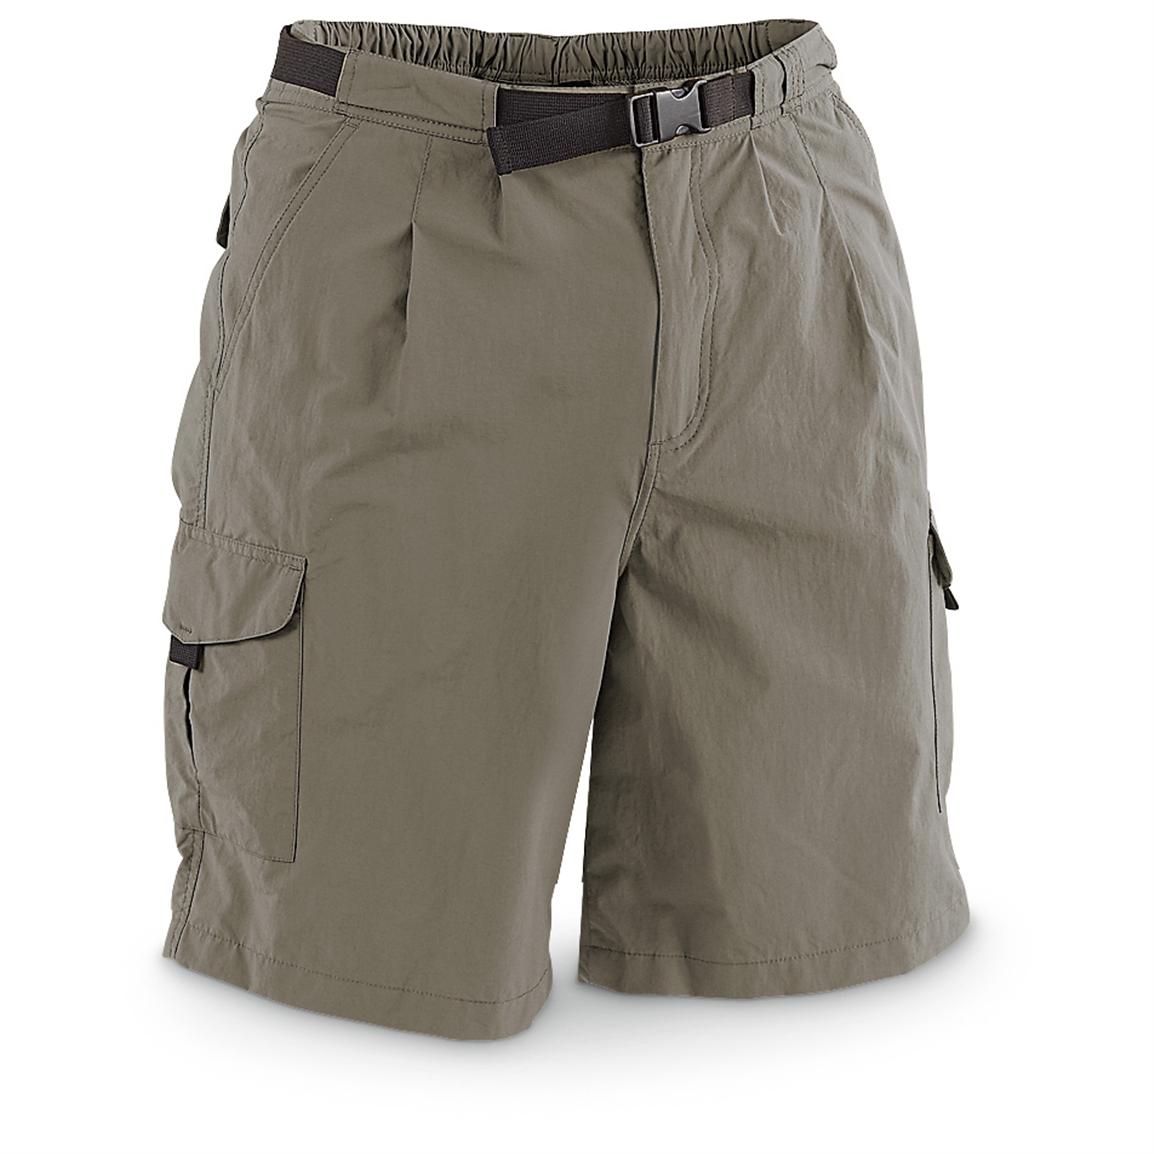 Guide Gear Men's Cargo River Shorts - 210833, Shorts at Sportsman's Guide